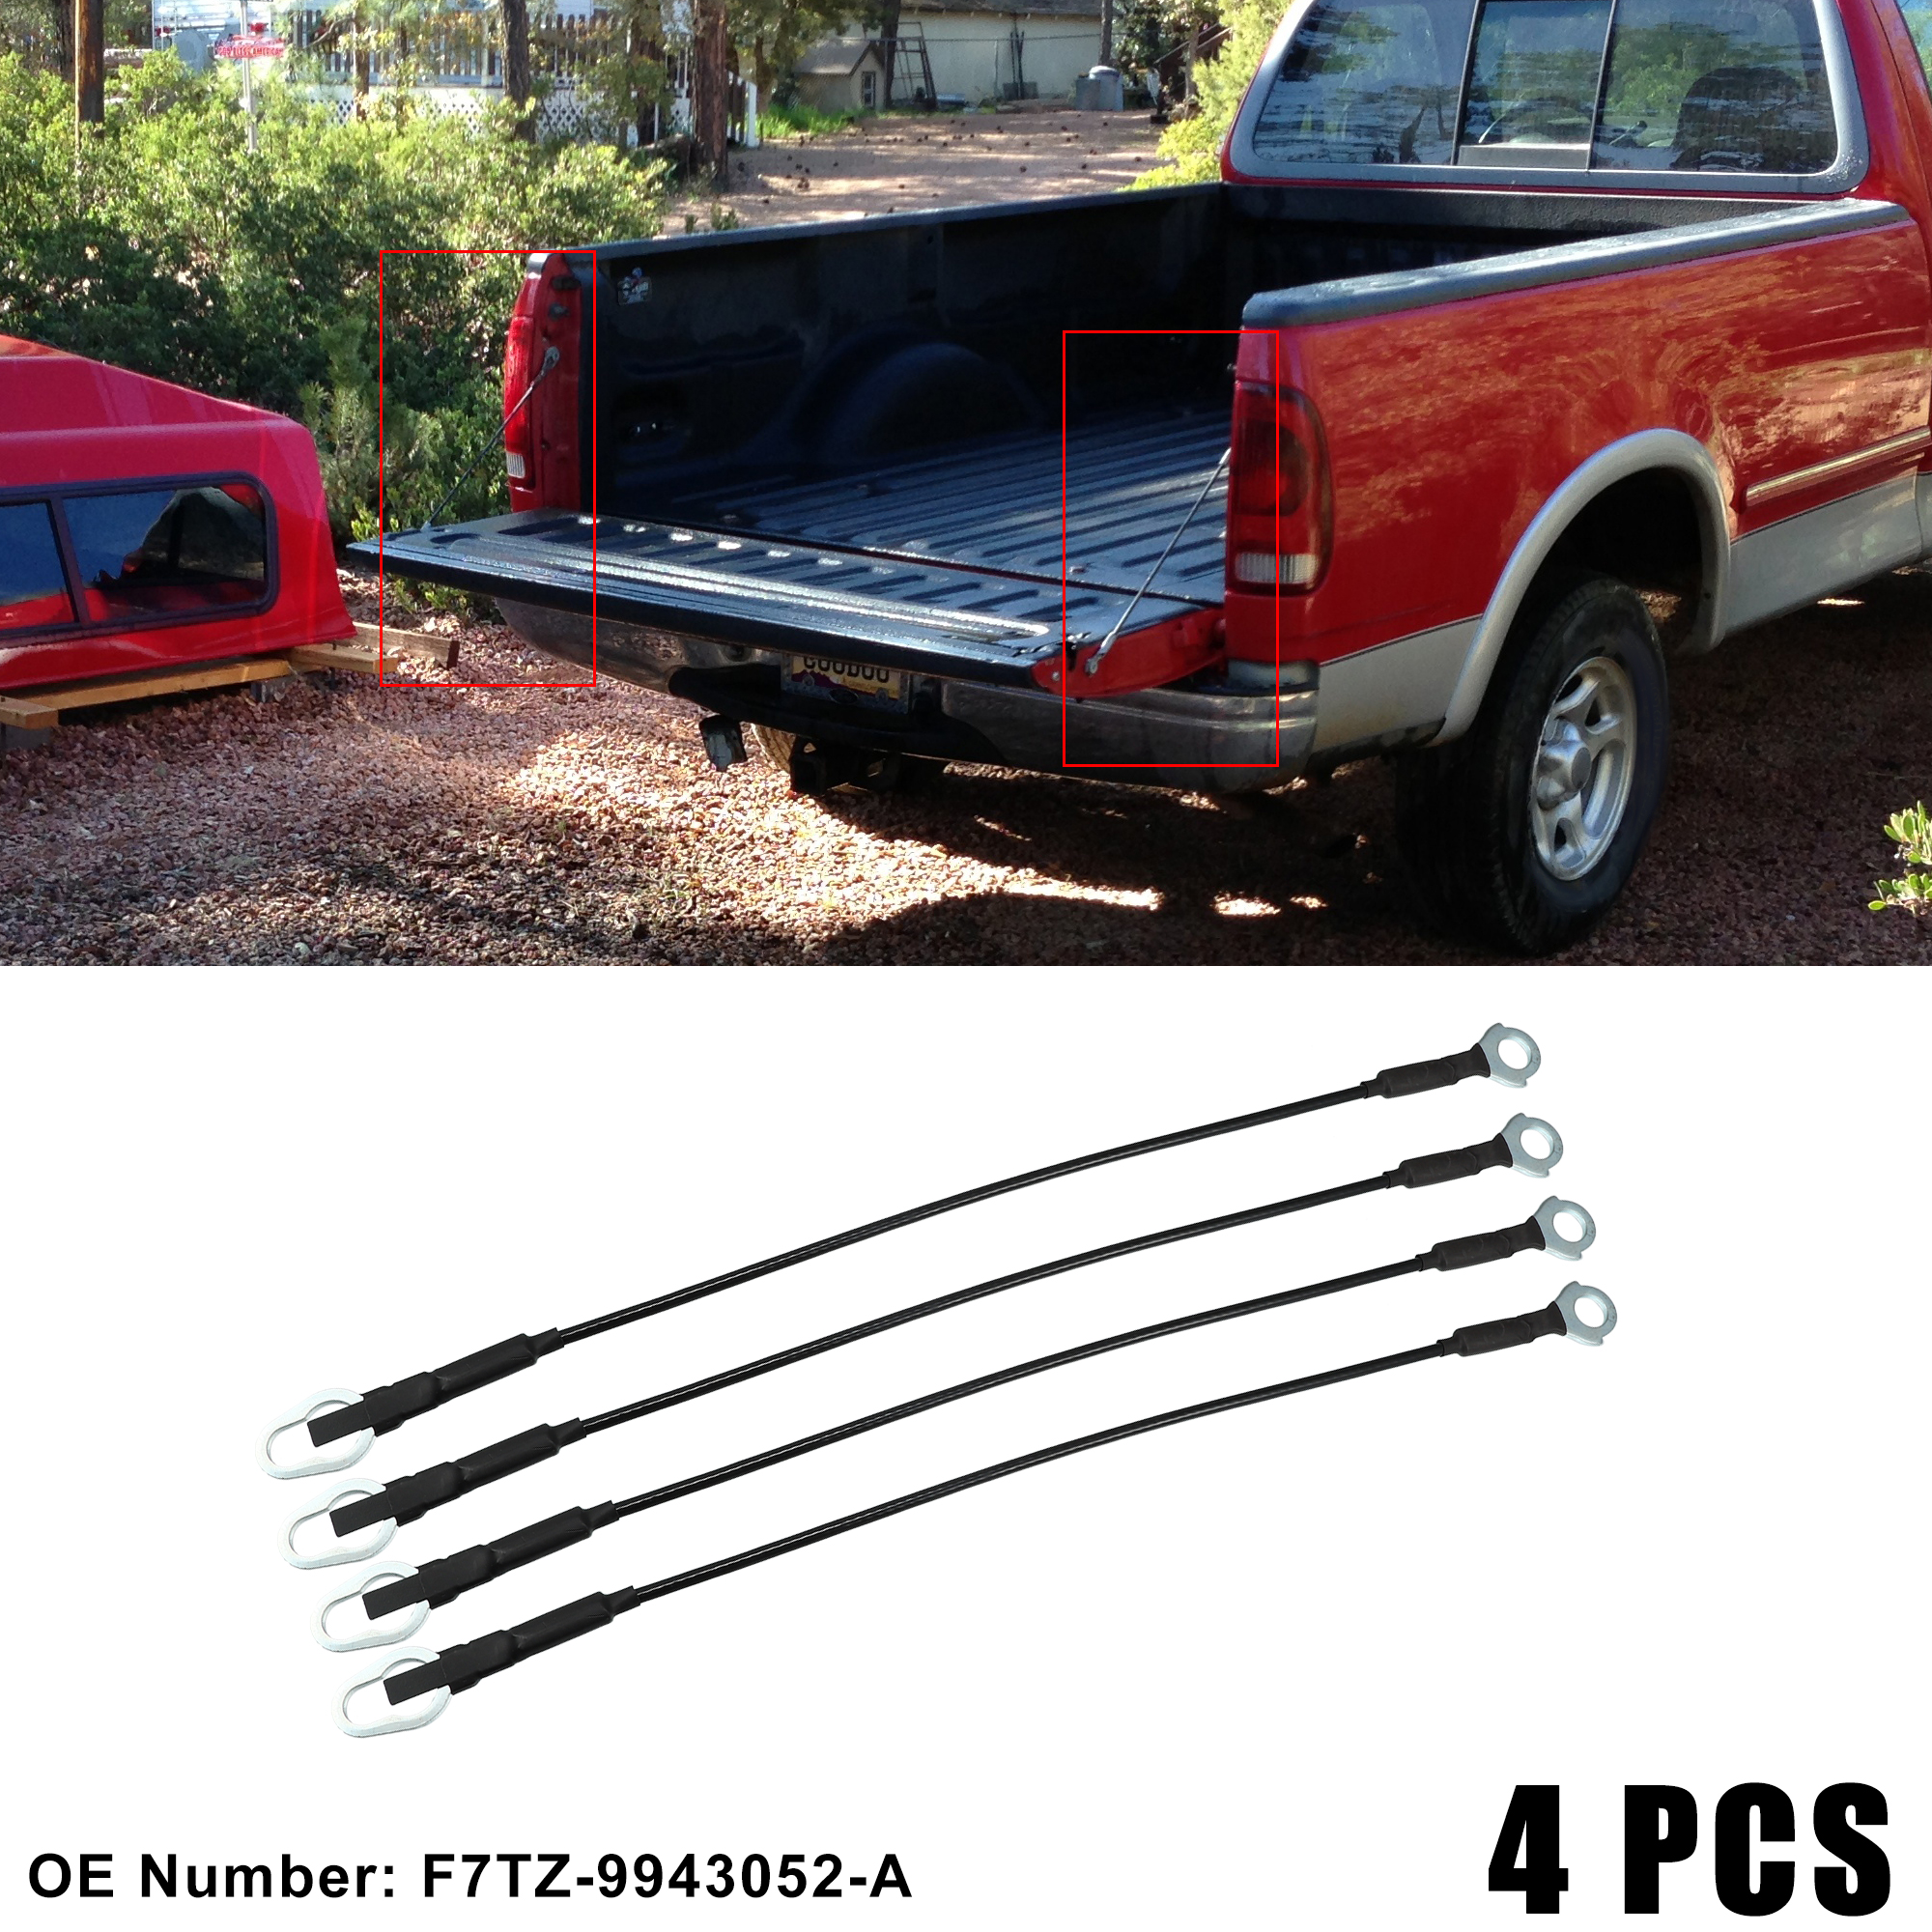 Unique Bargains 4pcs Tailgate Support Cables Pickup F7TZ-9943052-A for Ford F-100 F-150 F-250